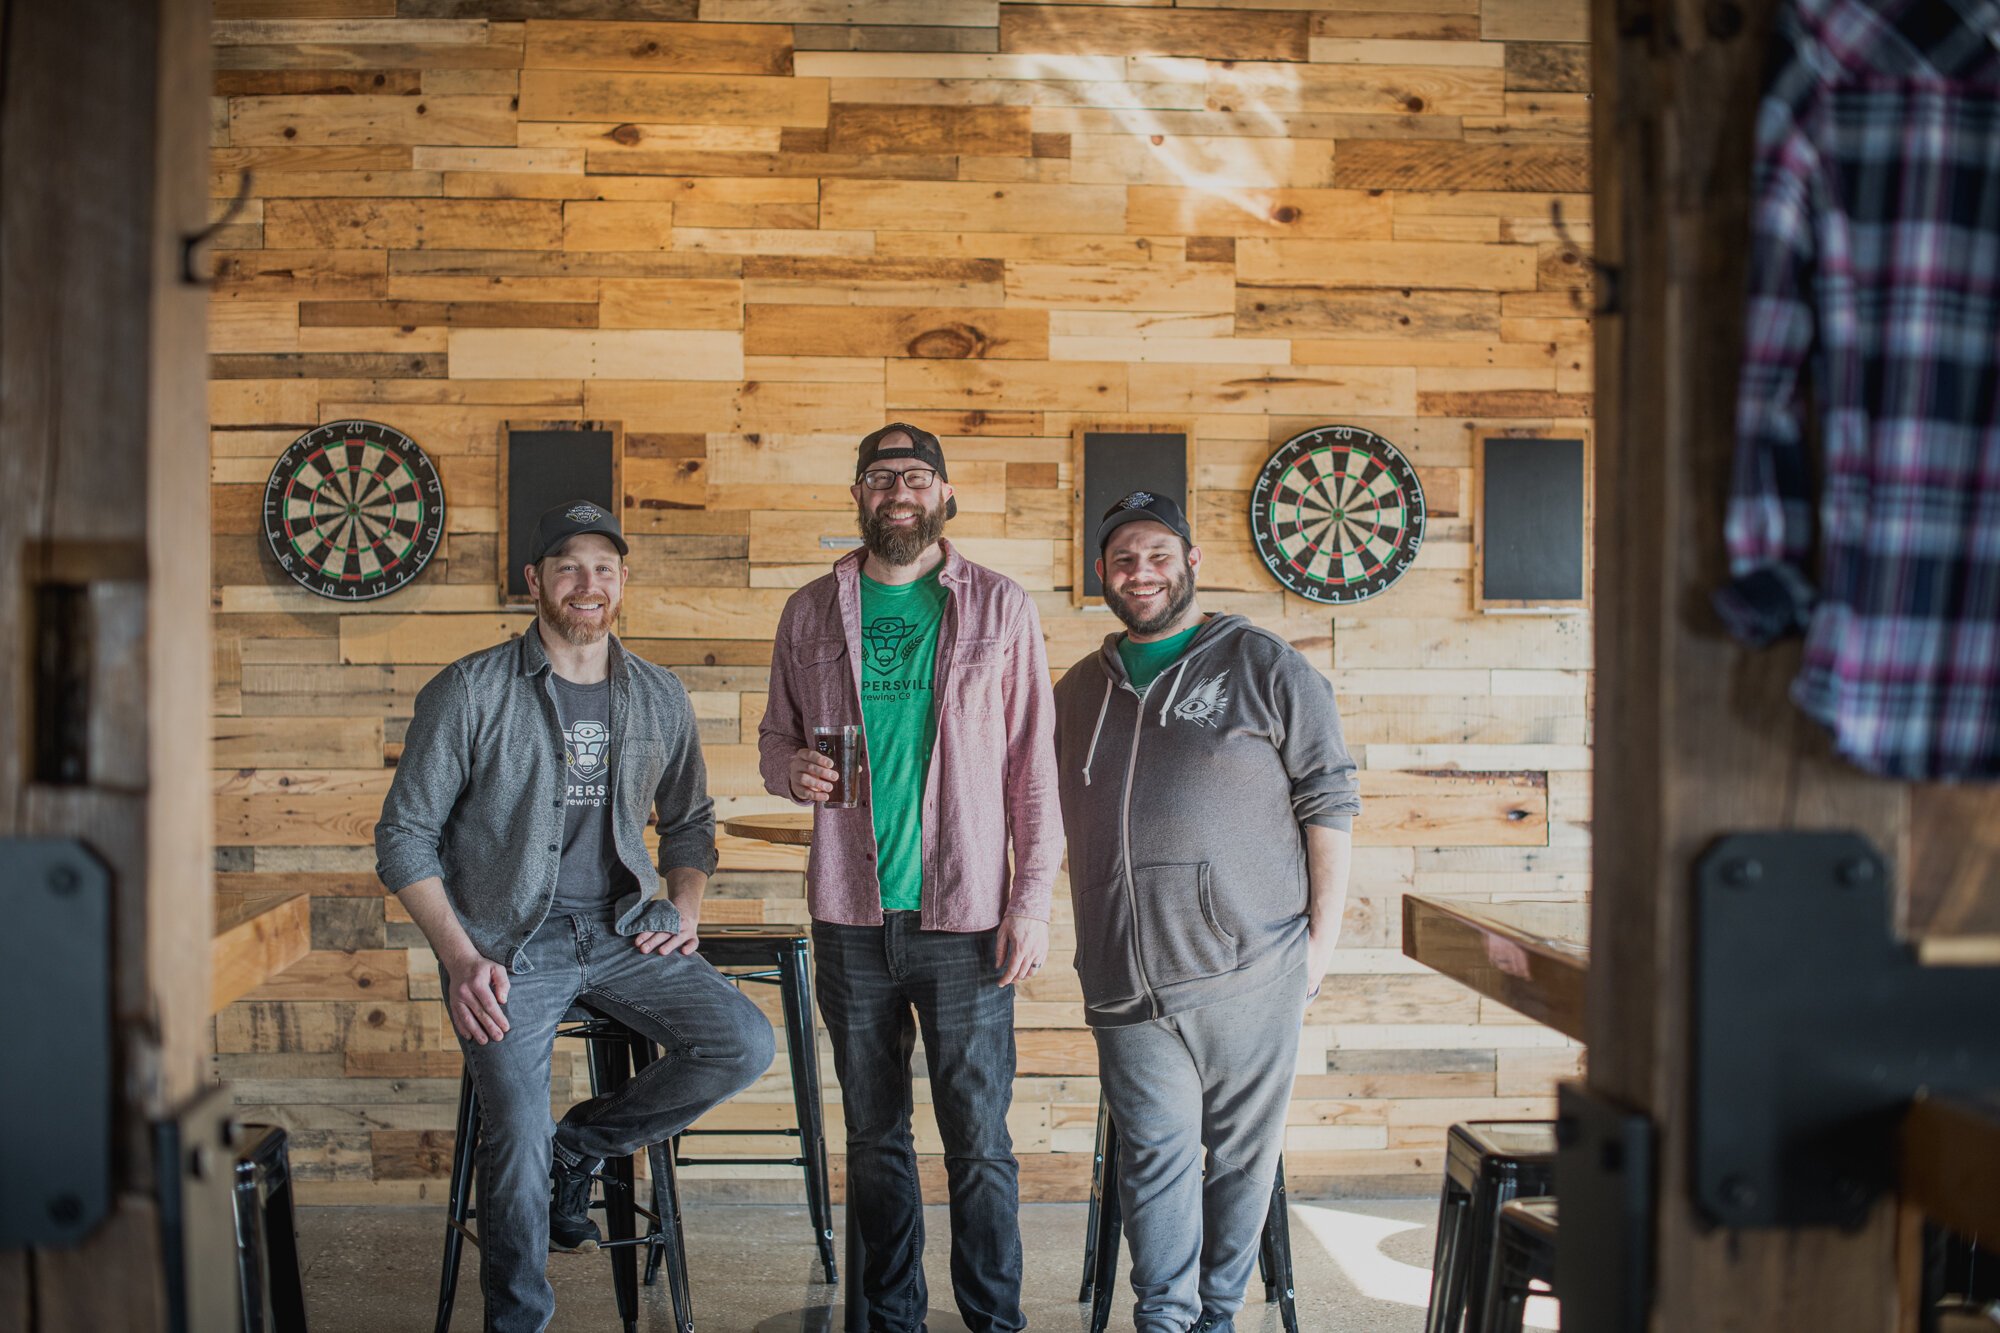 The team, from left: Sean Sorensen, general manager; Jeremy Grossenbacher, co-founder; and Jim Goodburn, brewer and business partner.